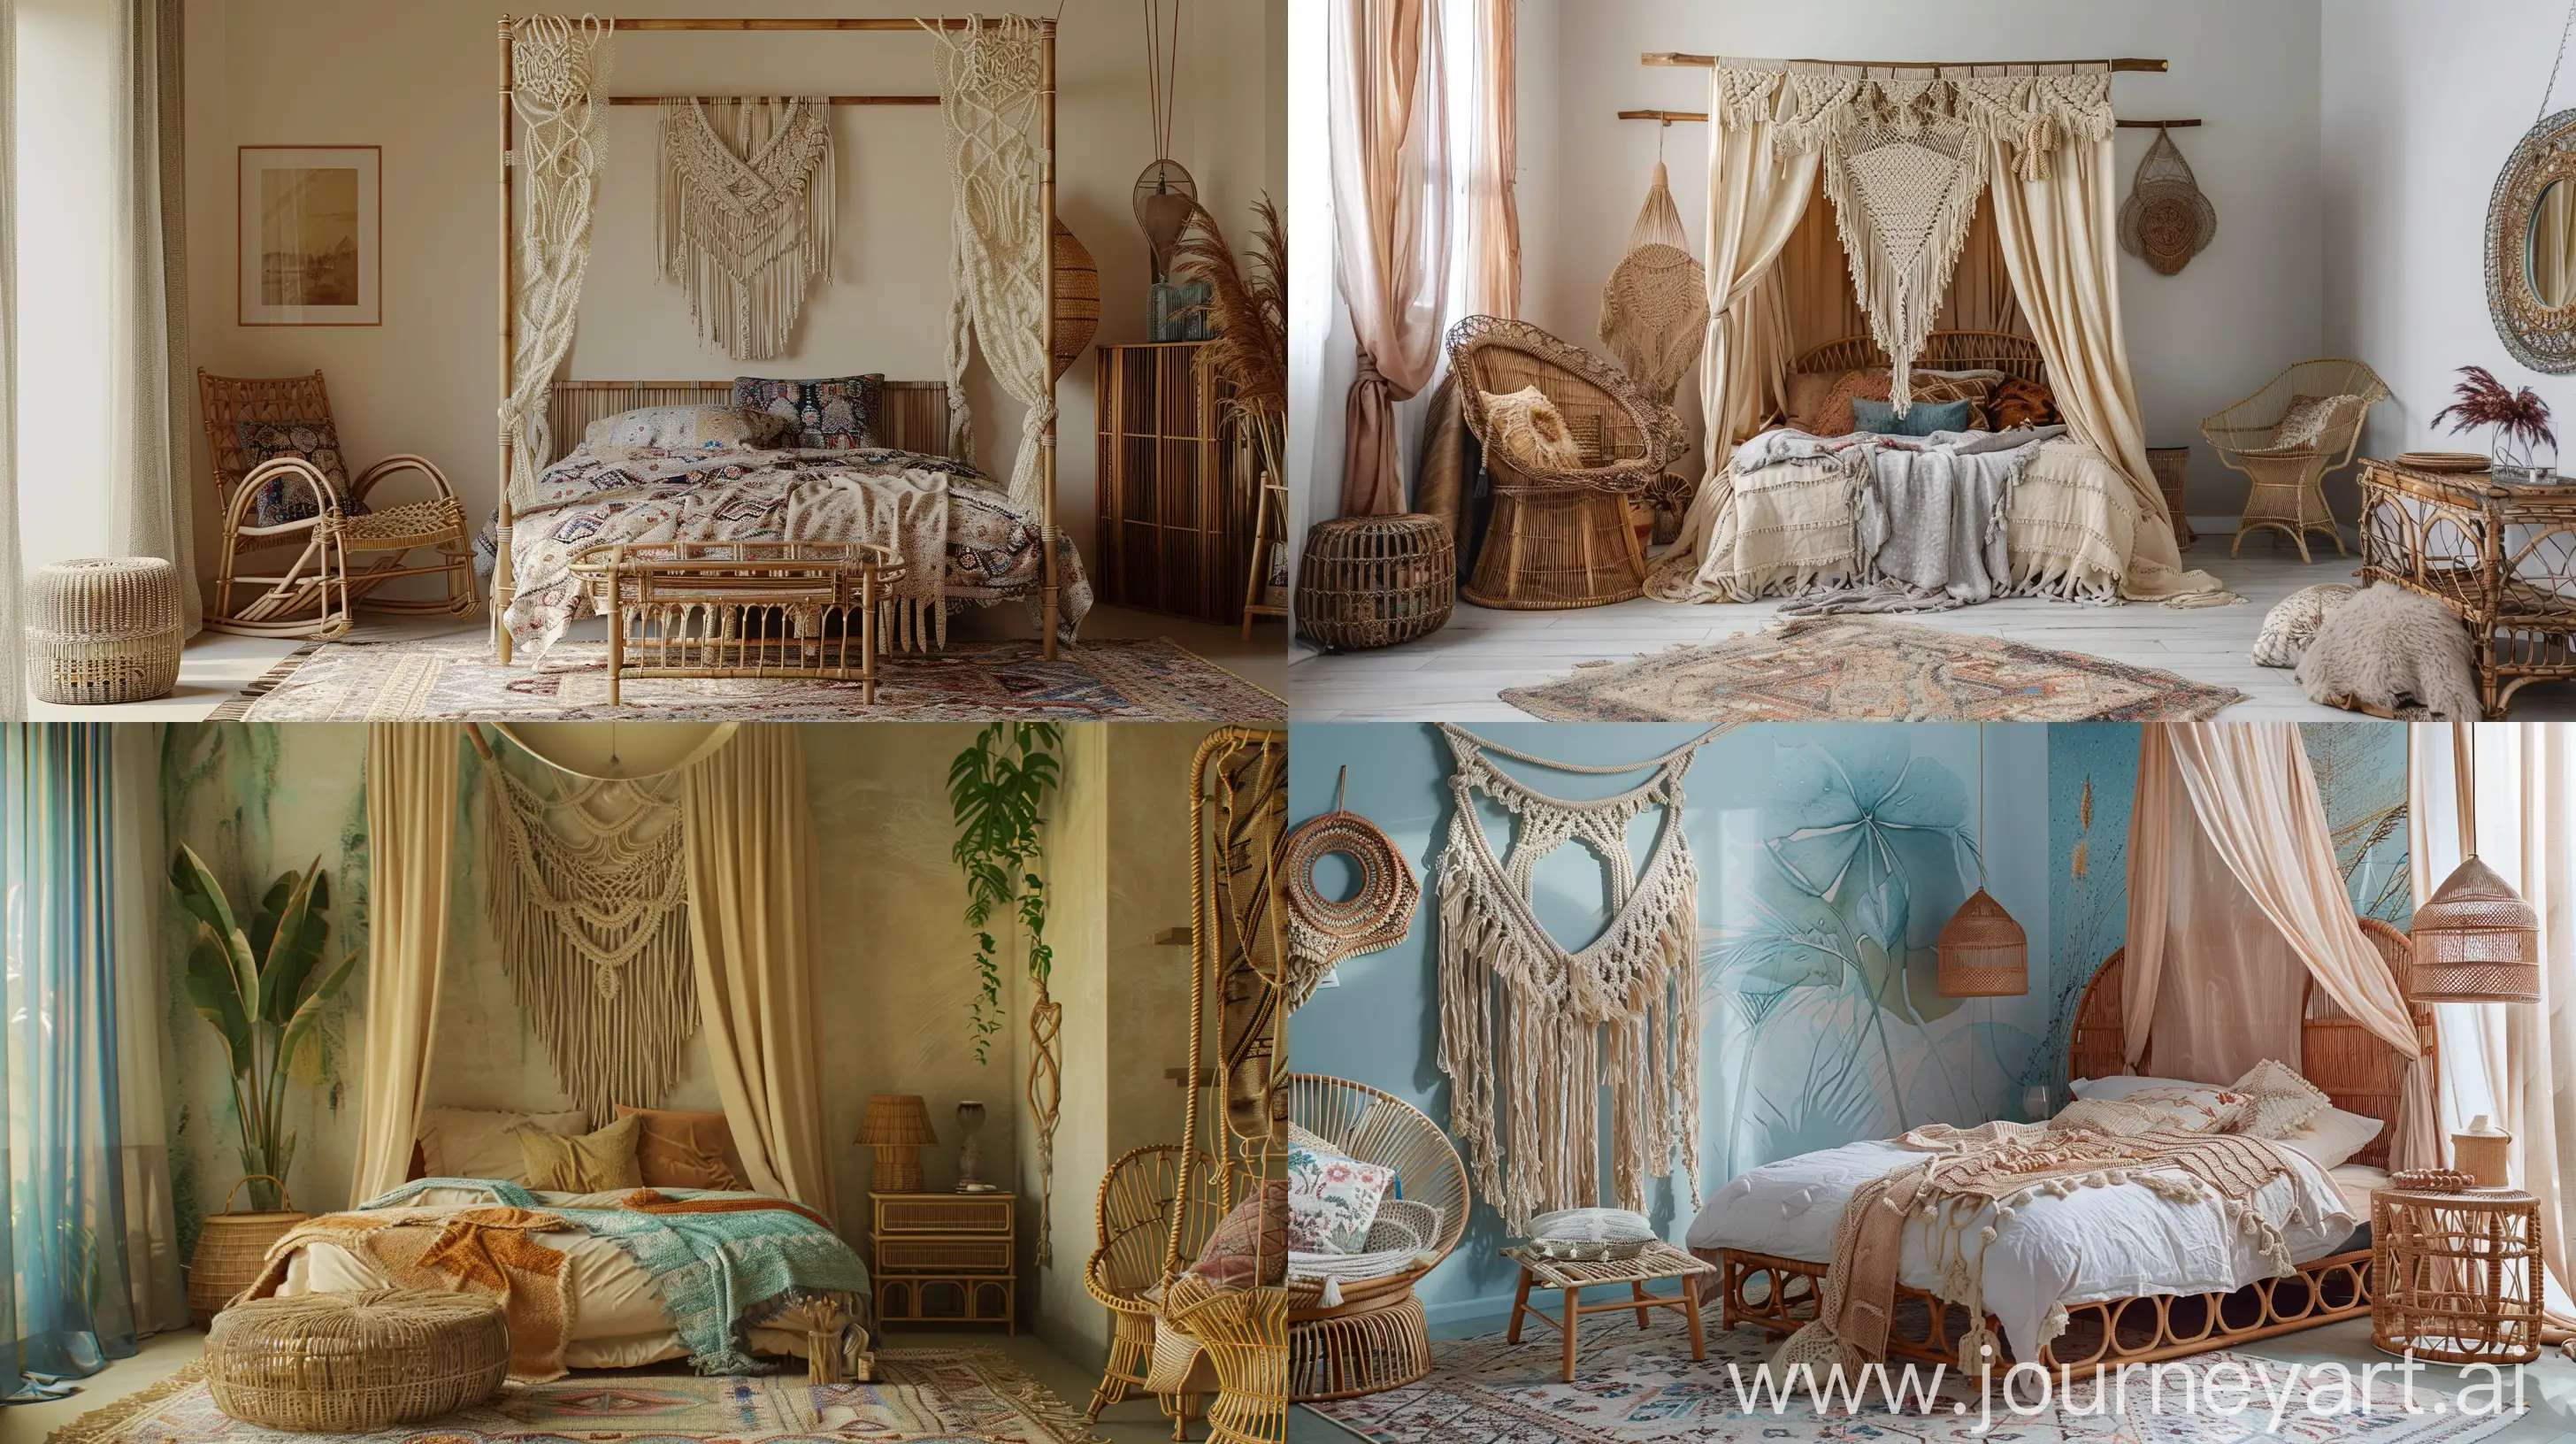 Boho Chic: Bedroom with Macrame Wall Hanging, Rattan Furniture, and a Canopy Bed draped in Flowing Fabrics. --ar 16:9 --v 6 --ar 4:3 --no 61324